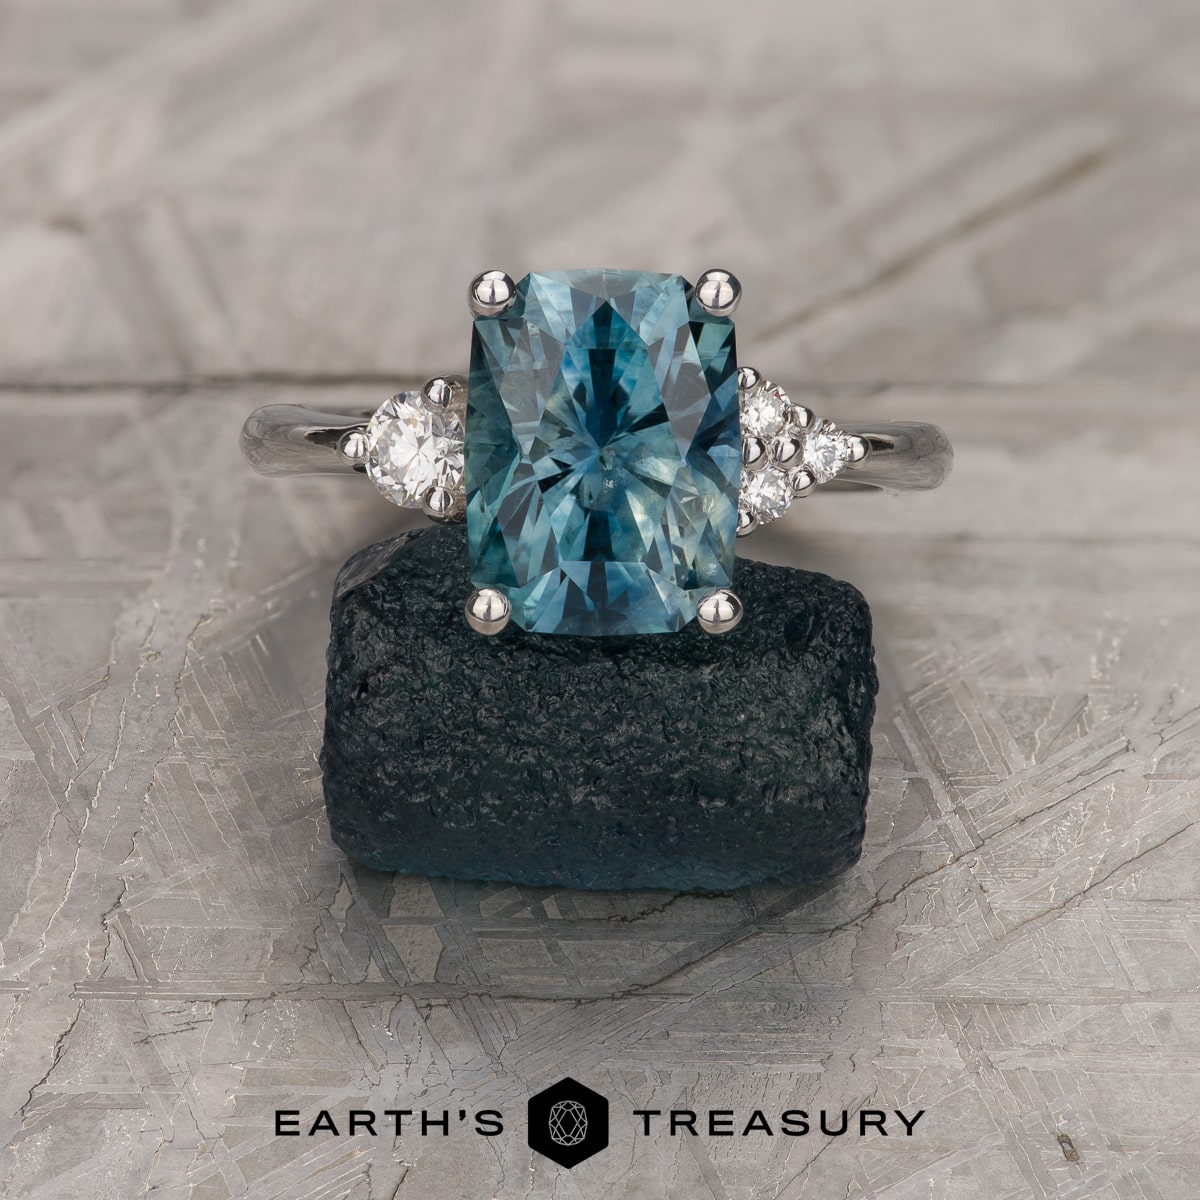 The "Erythia" in 14k white gold with 3.29-Carat Montana Sapphire